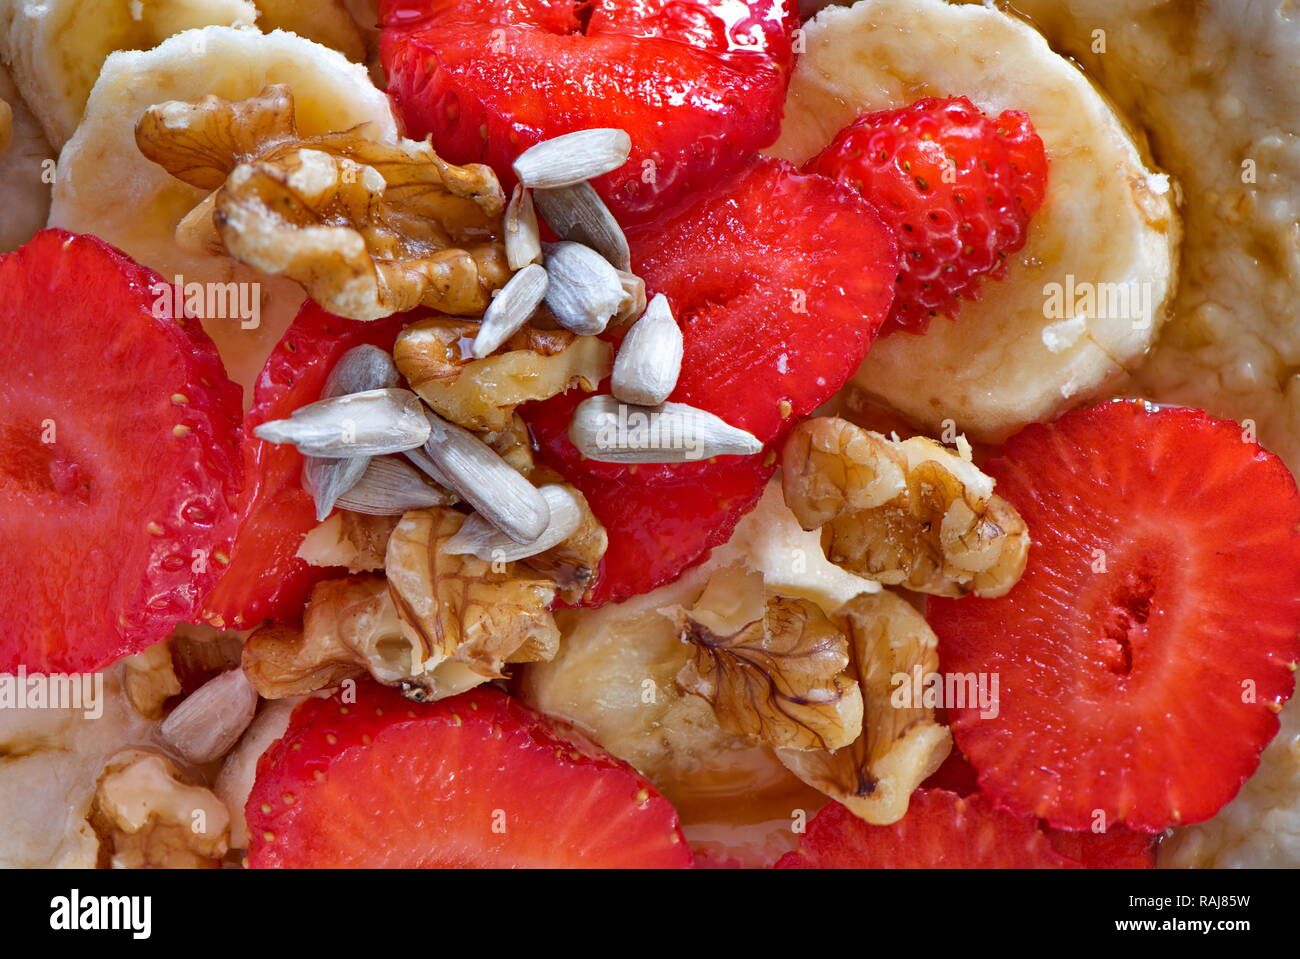 A healthy breakfast of fruits, nuts and seed like strawberries, pumpkin seeds, banana and walnuts Stock Photo